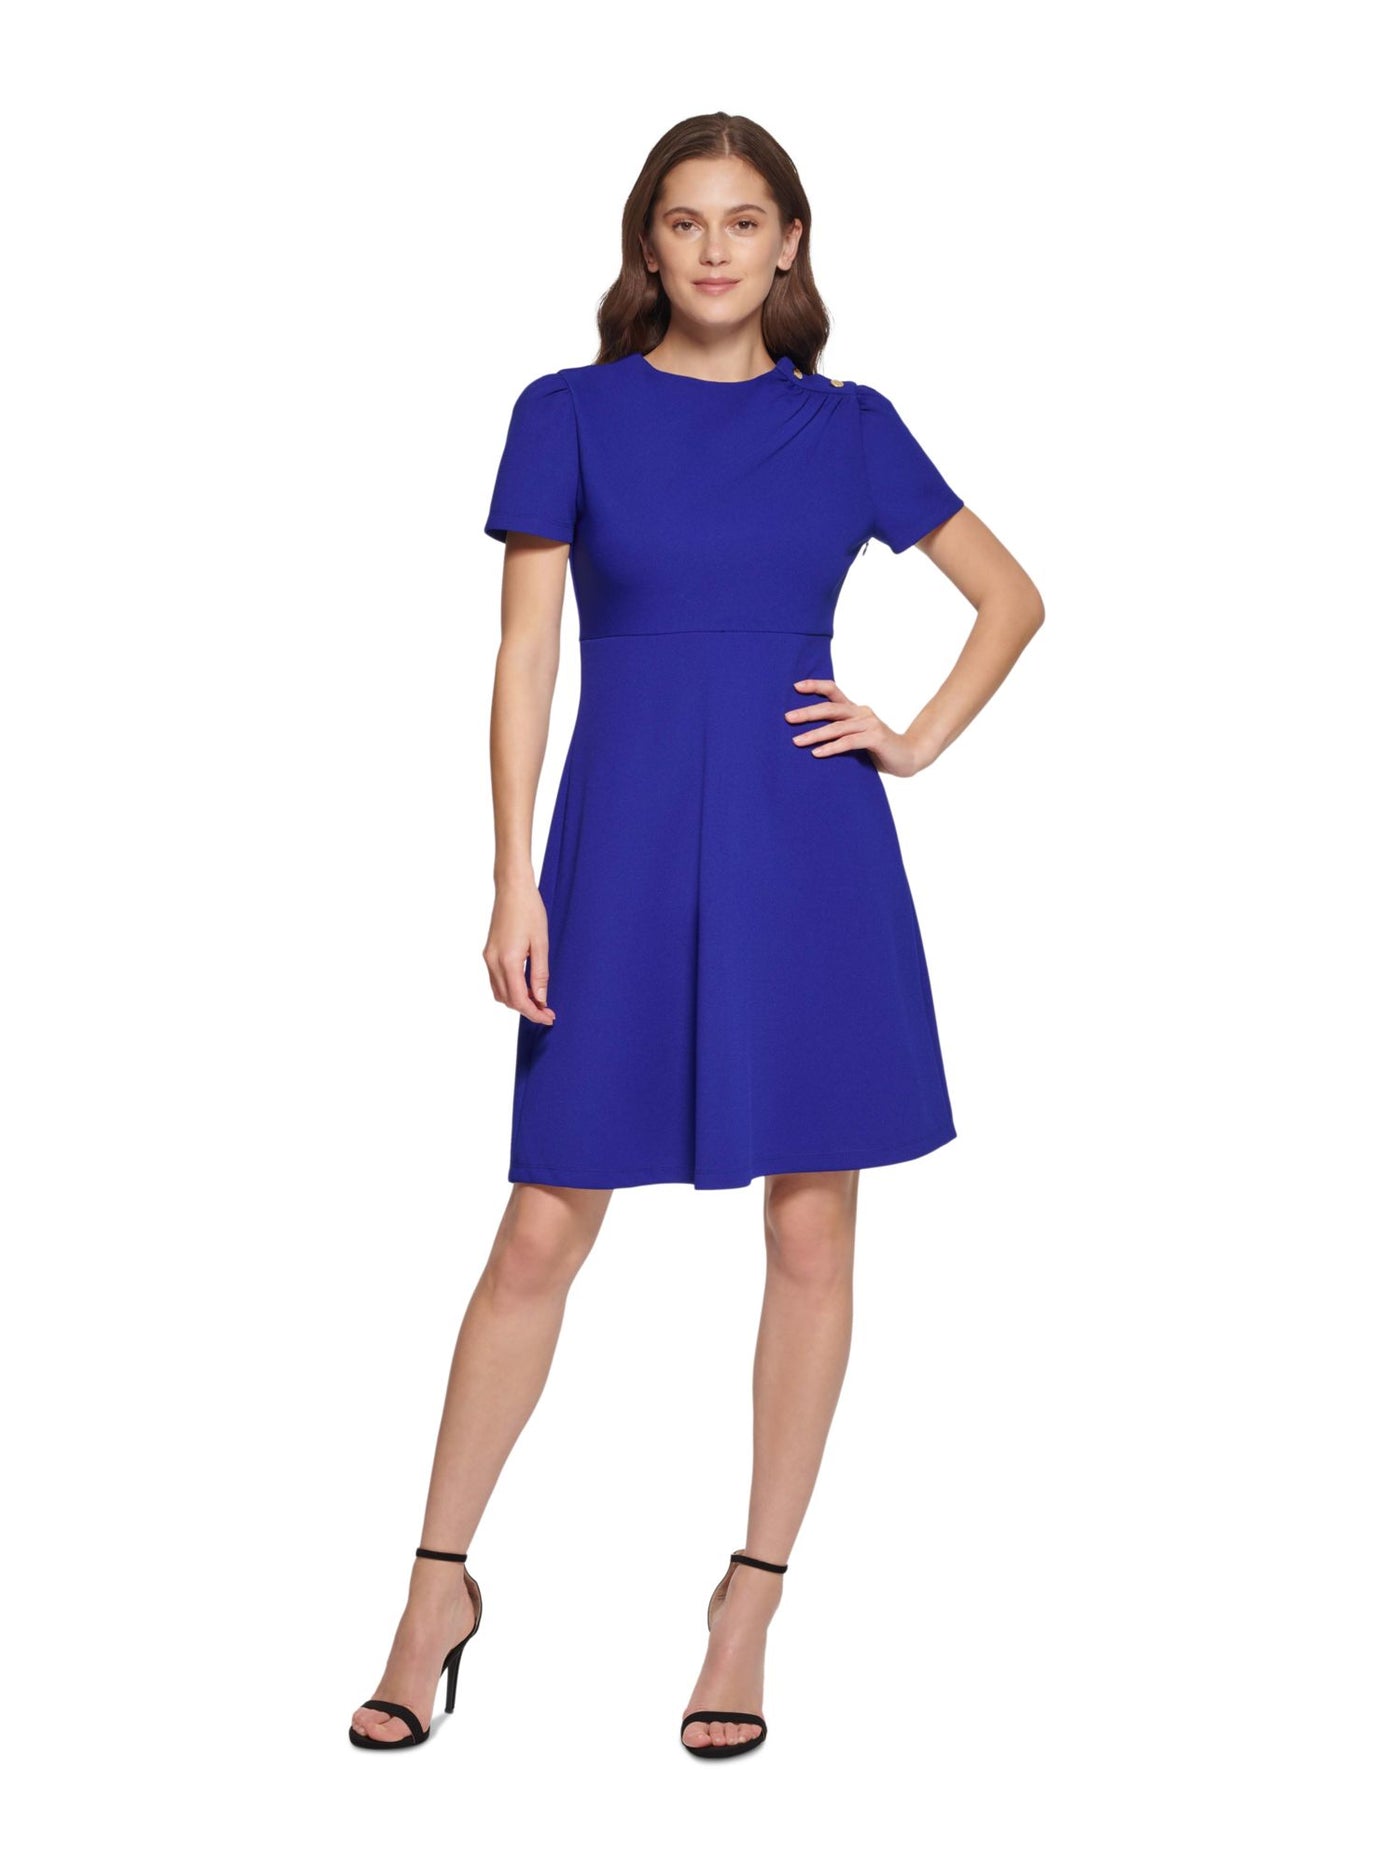 DKNY Womens Blue Zippered Unlined Tie Belt Button Detail Short Sleeve Round Neck Above The Knee Fit + Flare Dress Petites 2P